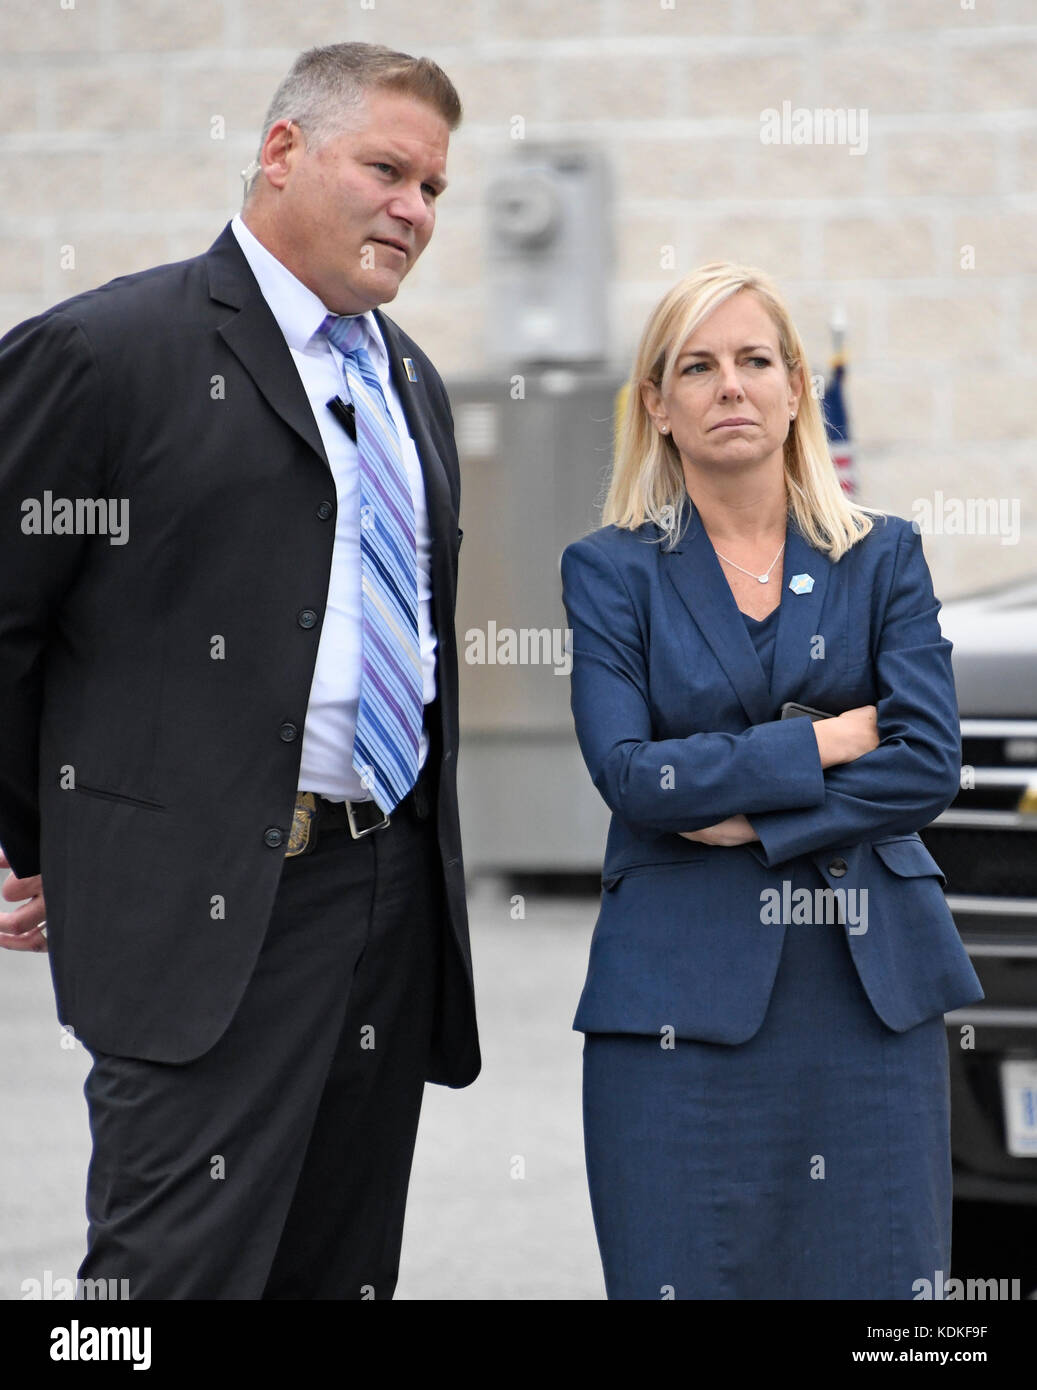 United States Secretary of Homeland Security-designate Kirstjen Nielsen, right, and an unidentified Secret Service agent look on as US President Donald J. Trump tours the US Secret Service James J. Rowley Training Center in Beltsville, Maryland on Friday, October 13, 2017. Credit: Ron Sachs/Pool via CNP - NO WIRE SERVICE · Photo: Ron Sachs/Consolidated News Photos/Ron Sachs - Pool via CNP Stock Photo